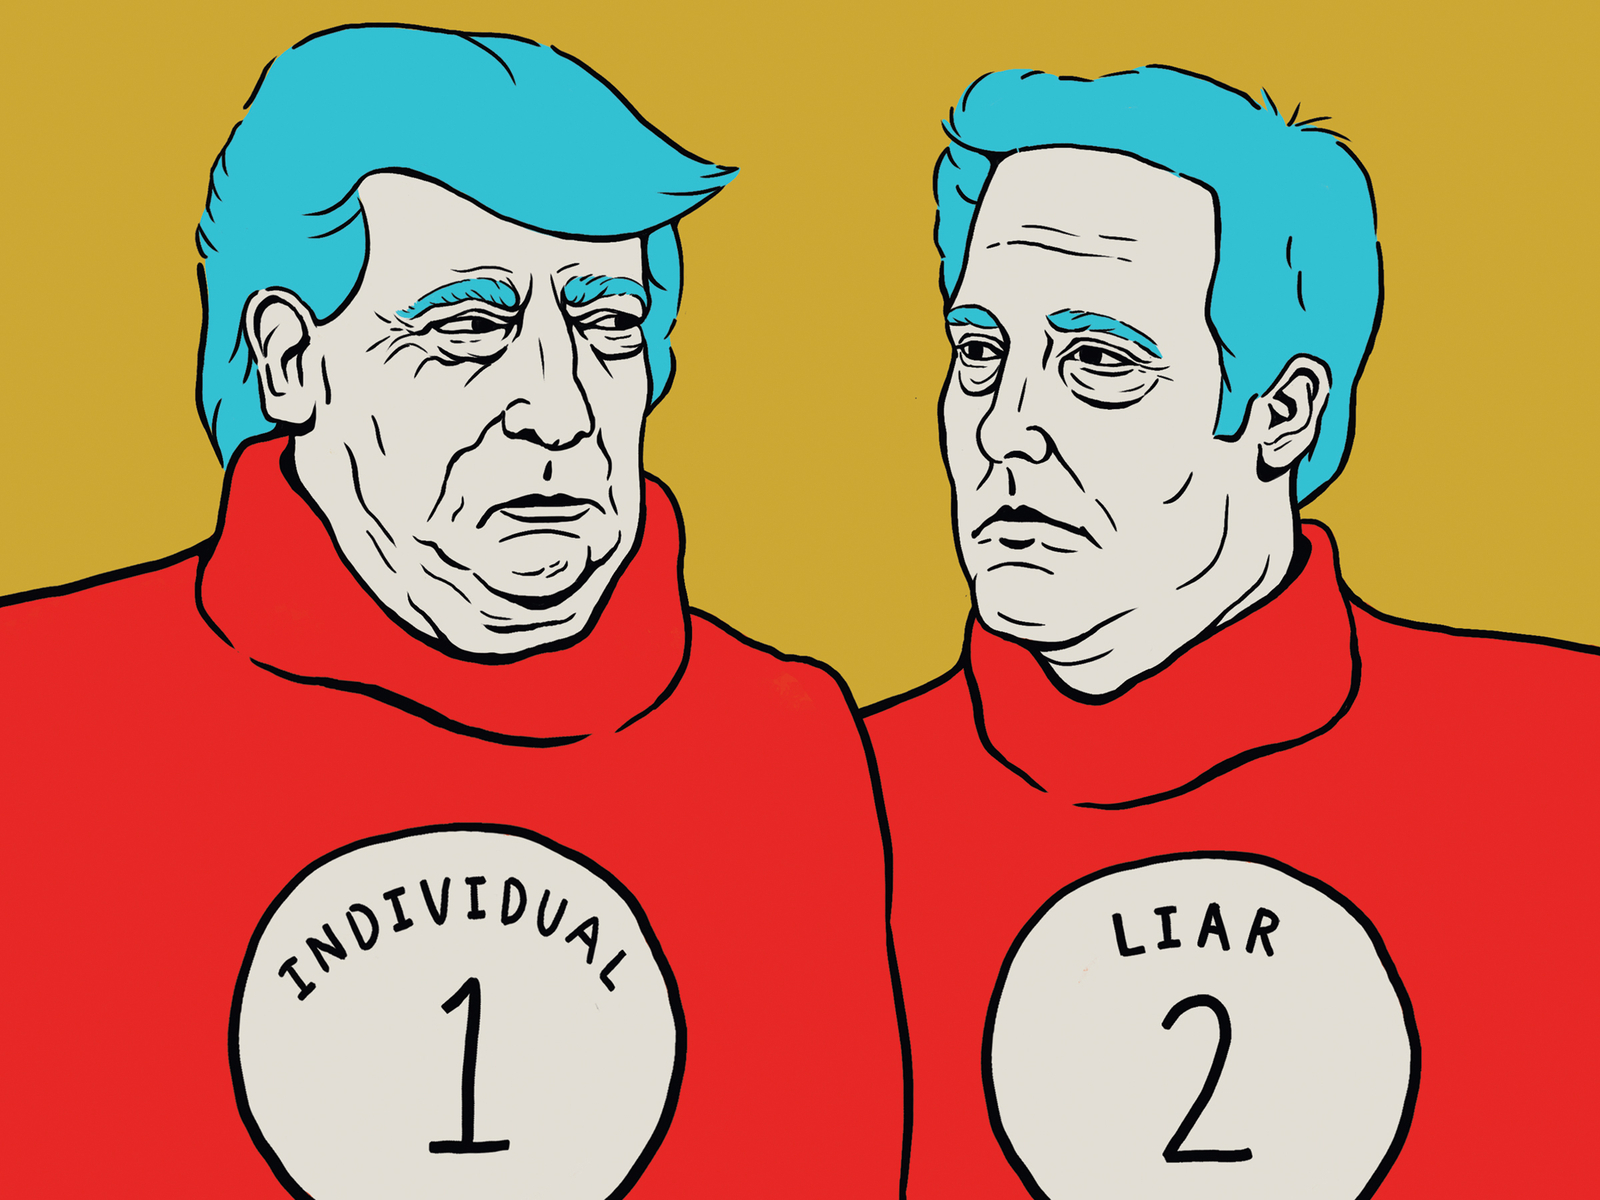 Thing 1 and Thing 2 cohen congress donald donald trump dr seuss illustration individual 1 michael cohen political president thing 1 thing 2 trump united states usa